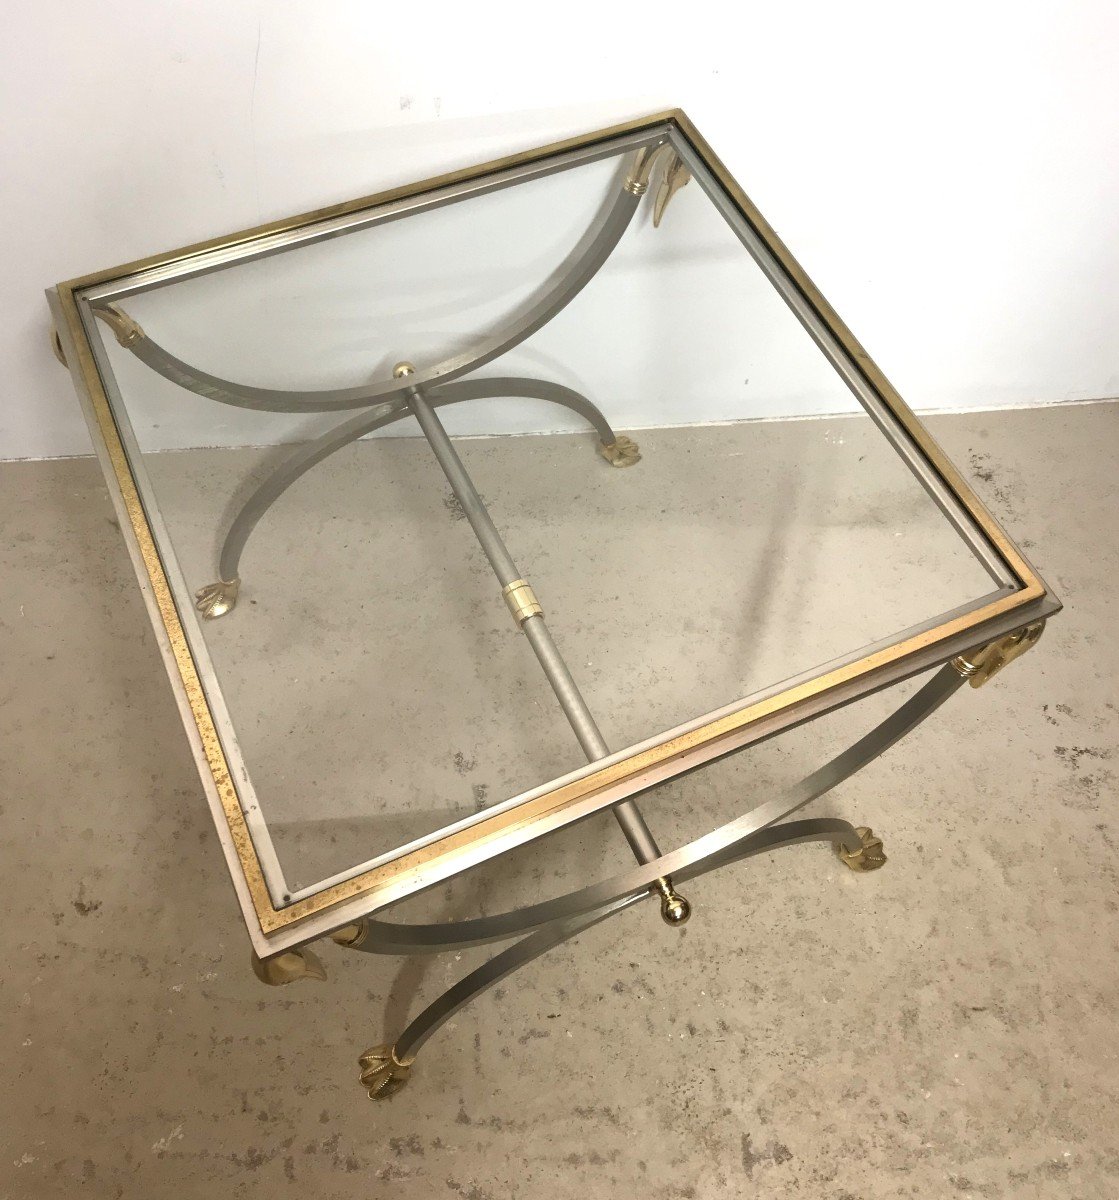 Jansen House Coffee Table In Brushed Metal And Brass From The 1970s.-photo-3